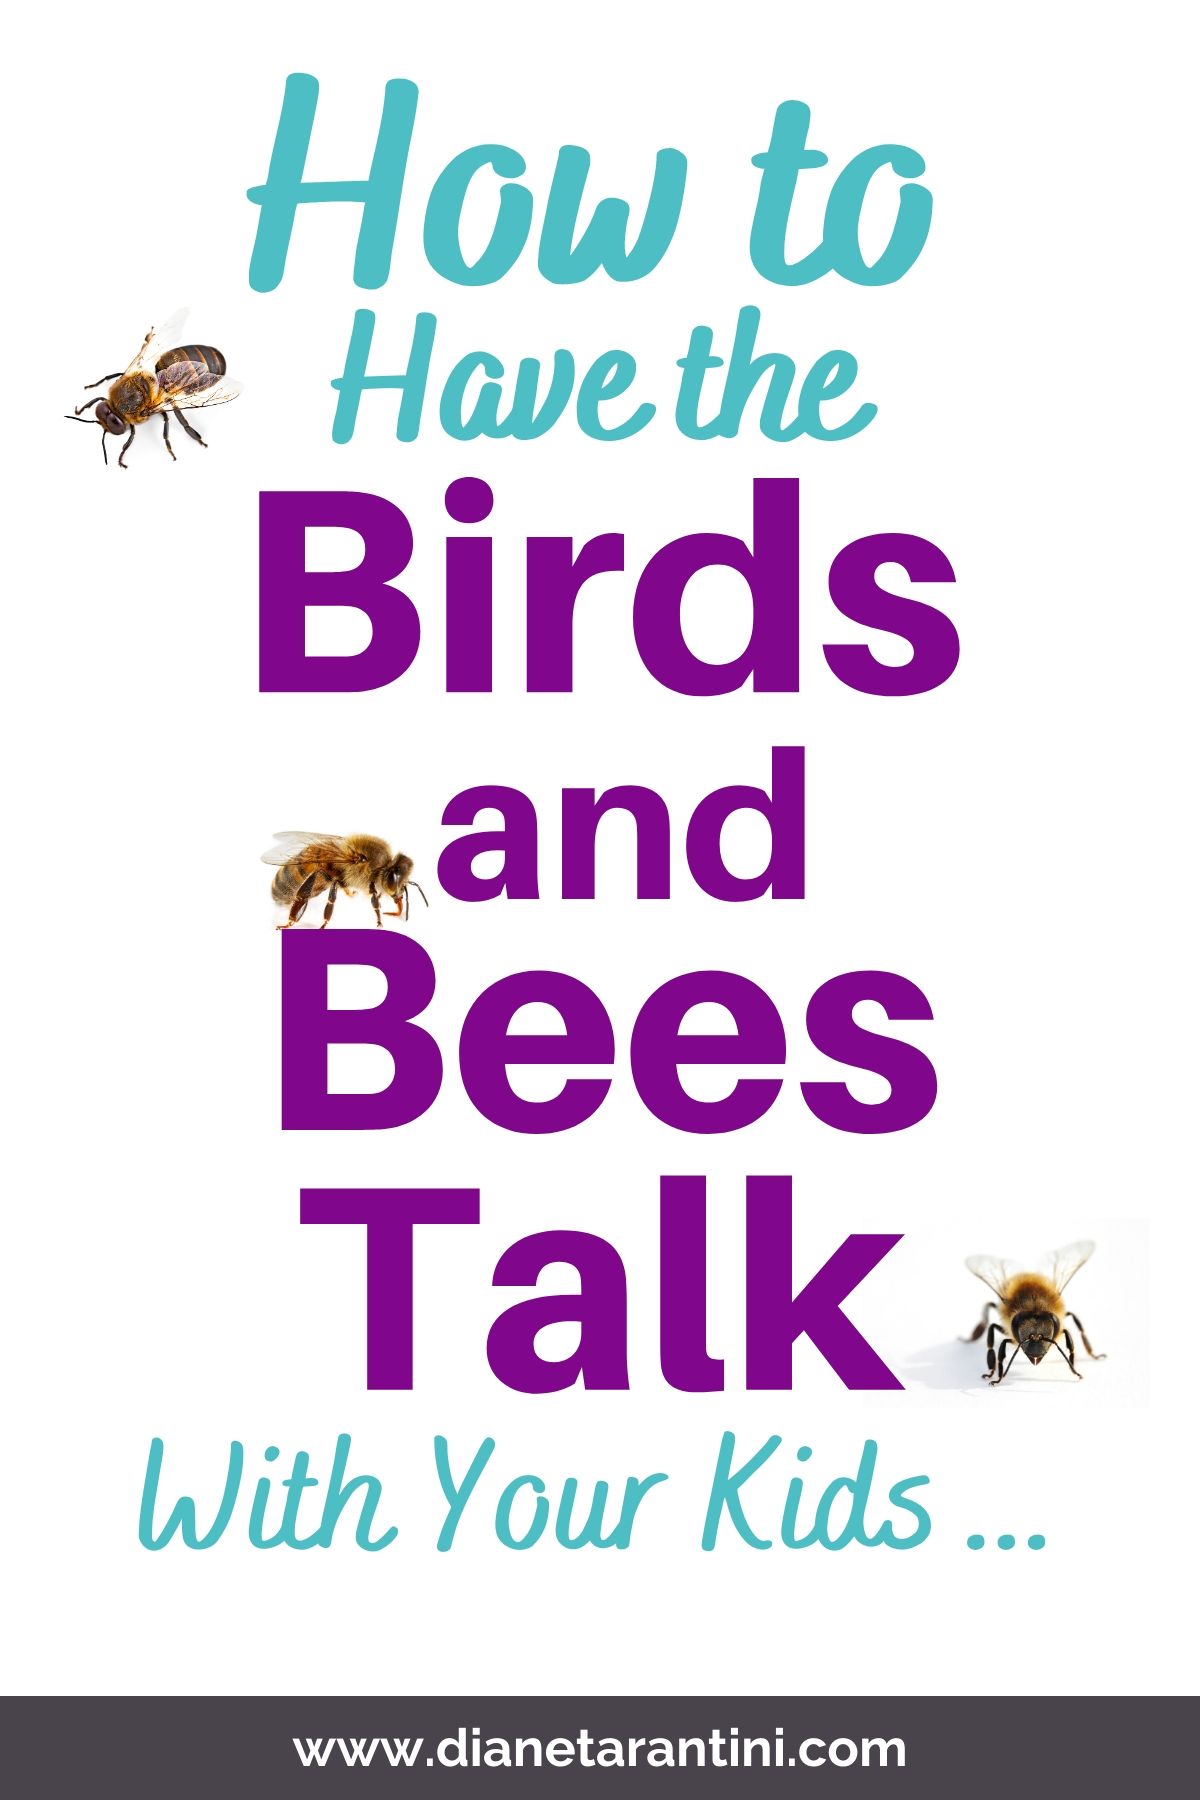 How to have the birds and bees talk with your kids